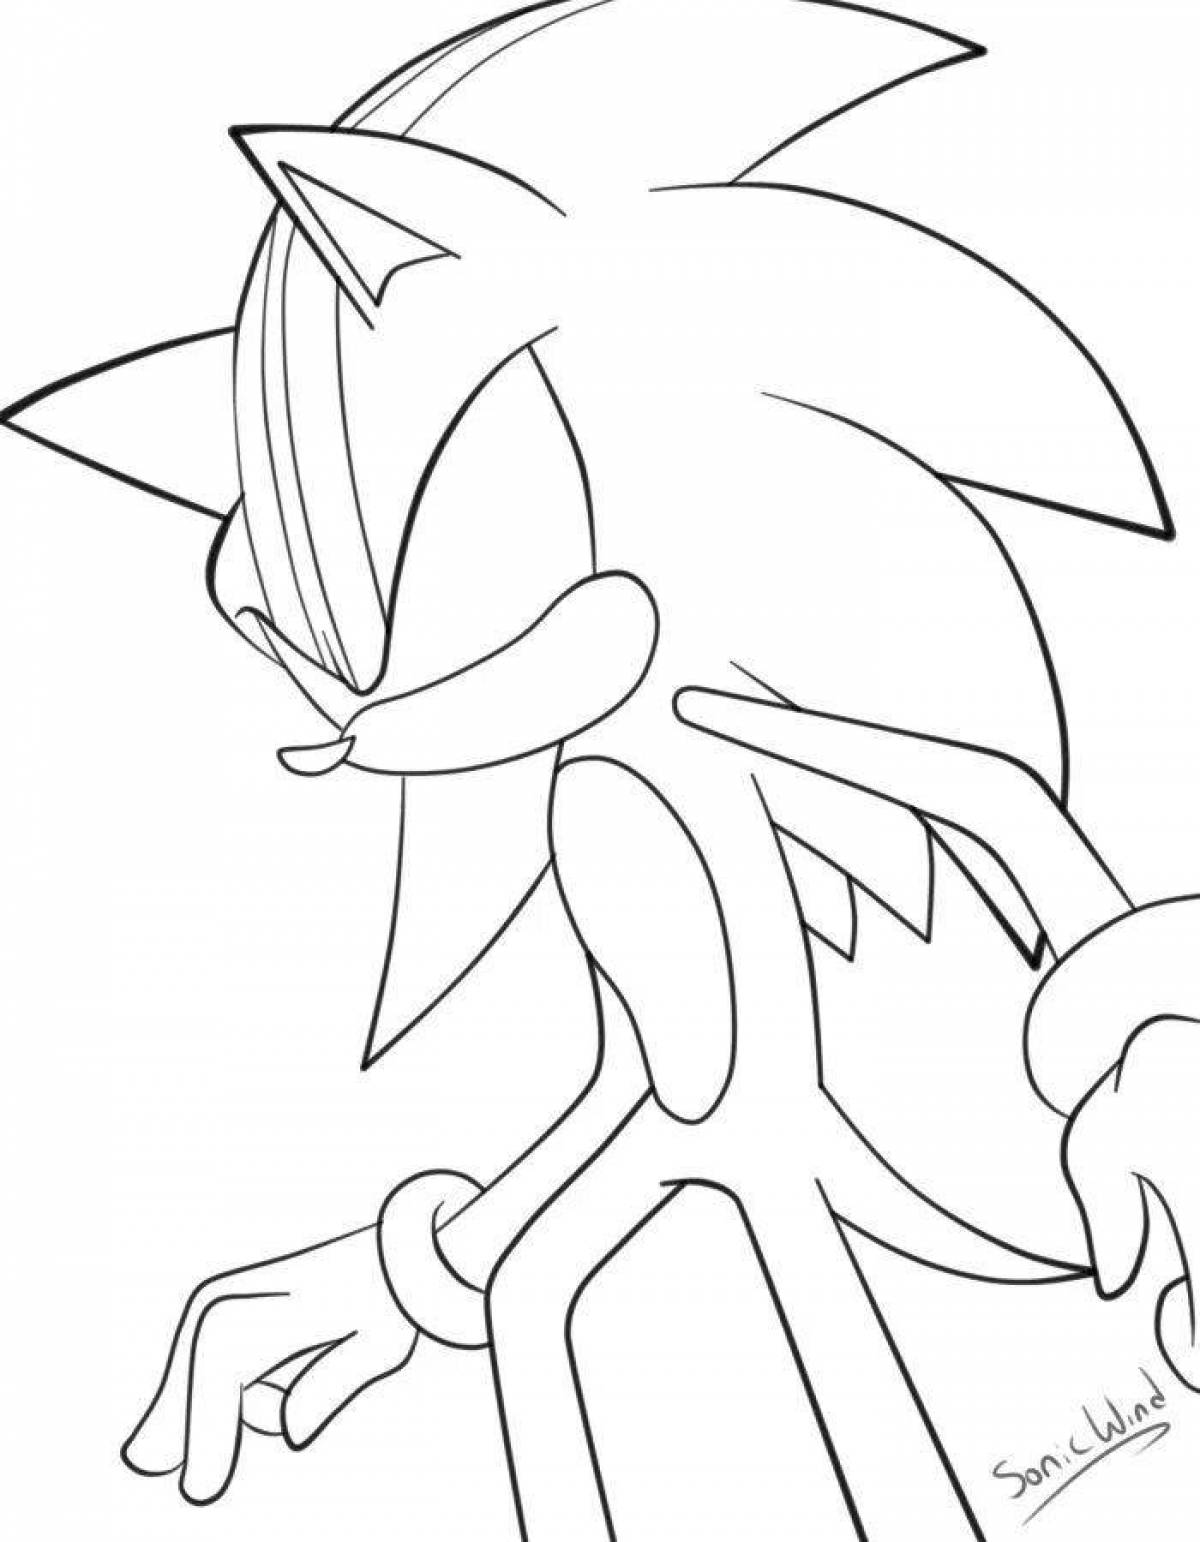 Tempting sonic.exe coloring